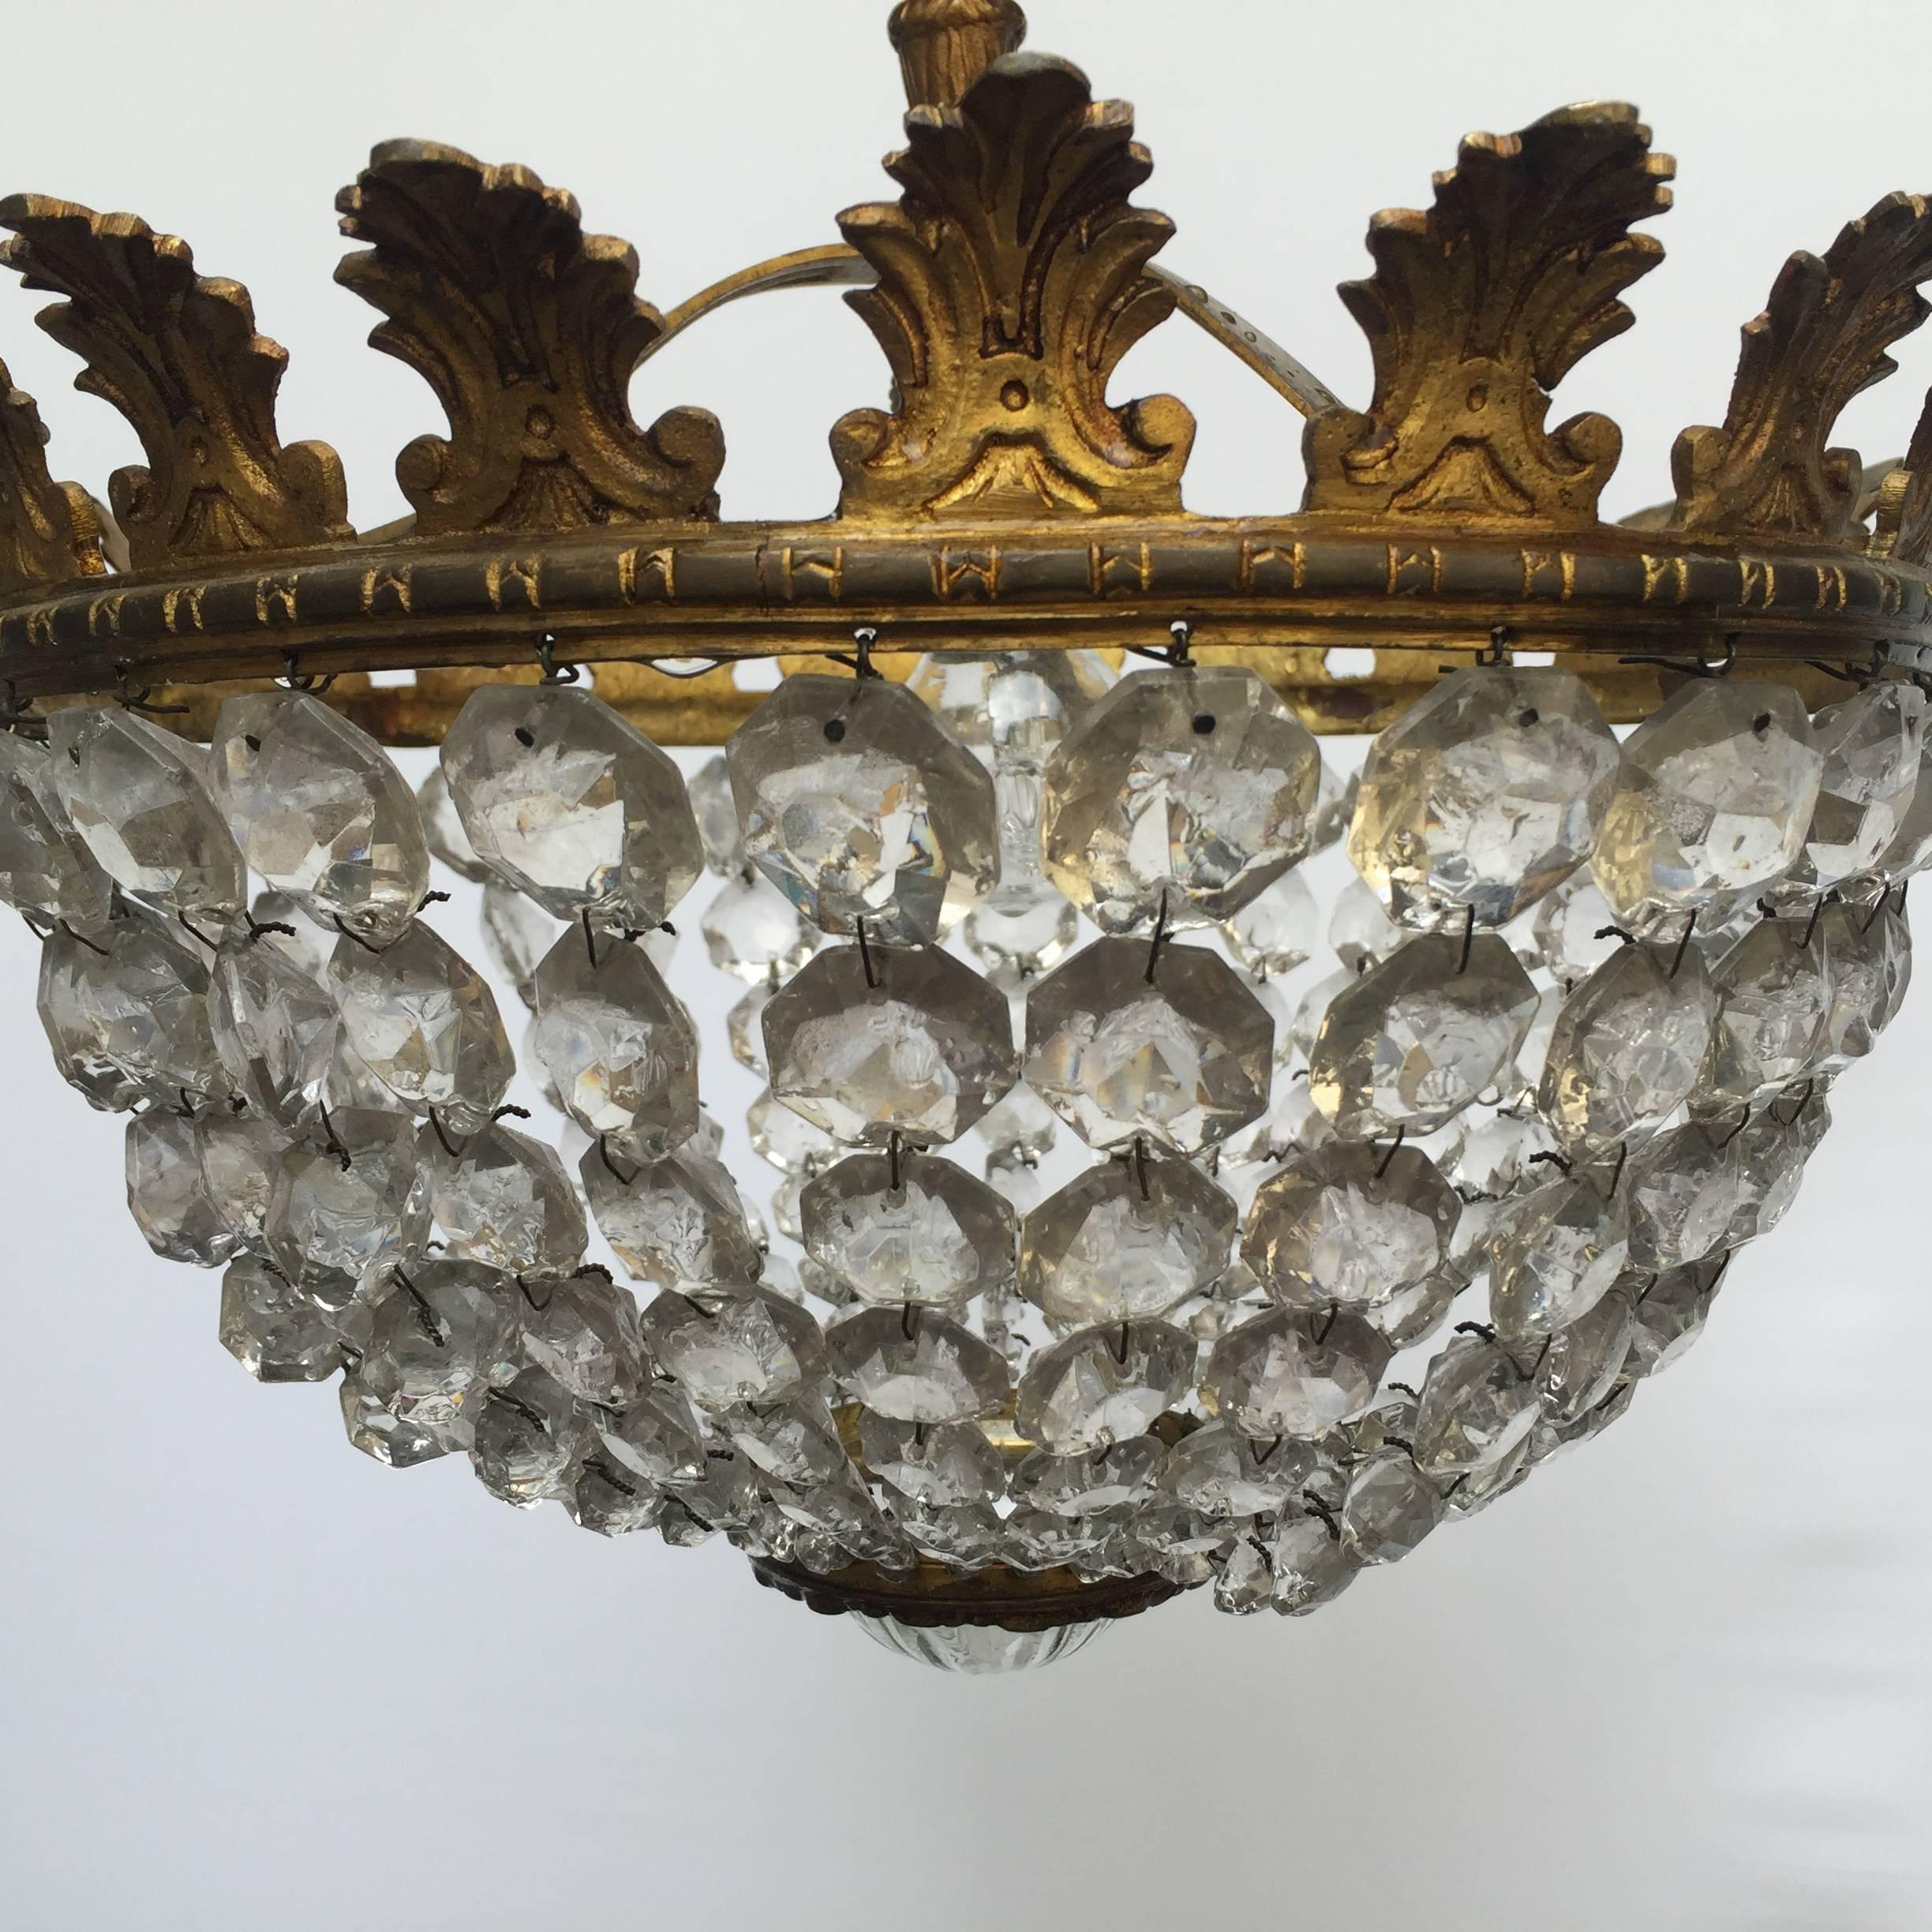 Antique Empire style bronze and glass chandelier, France, circa 1880s.
Lamp socket: one x B22 (French bajonnett)
Very good vintage condition, new rewired for U.S.